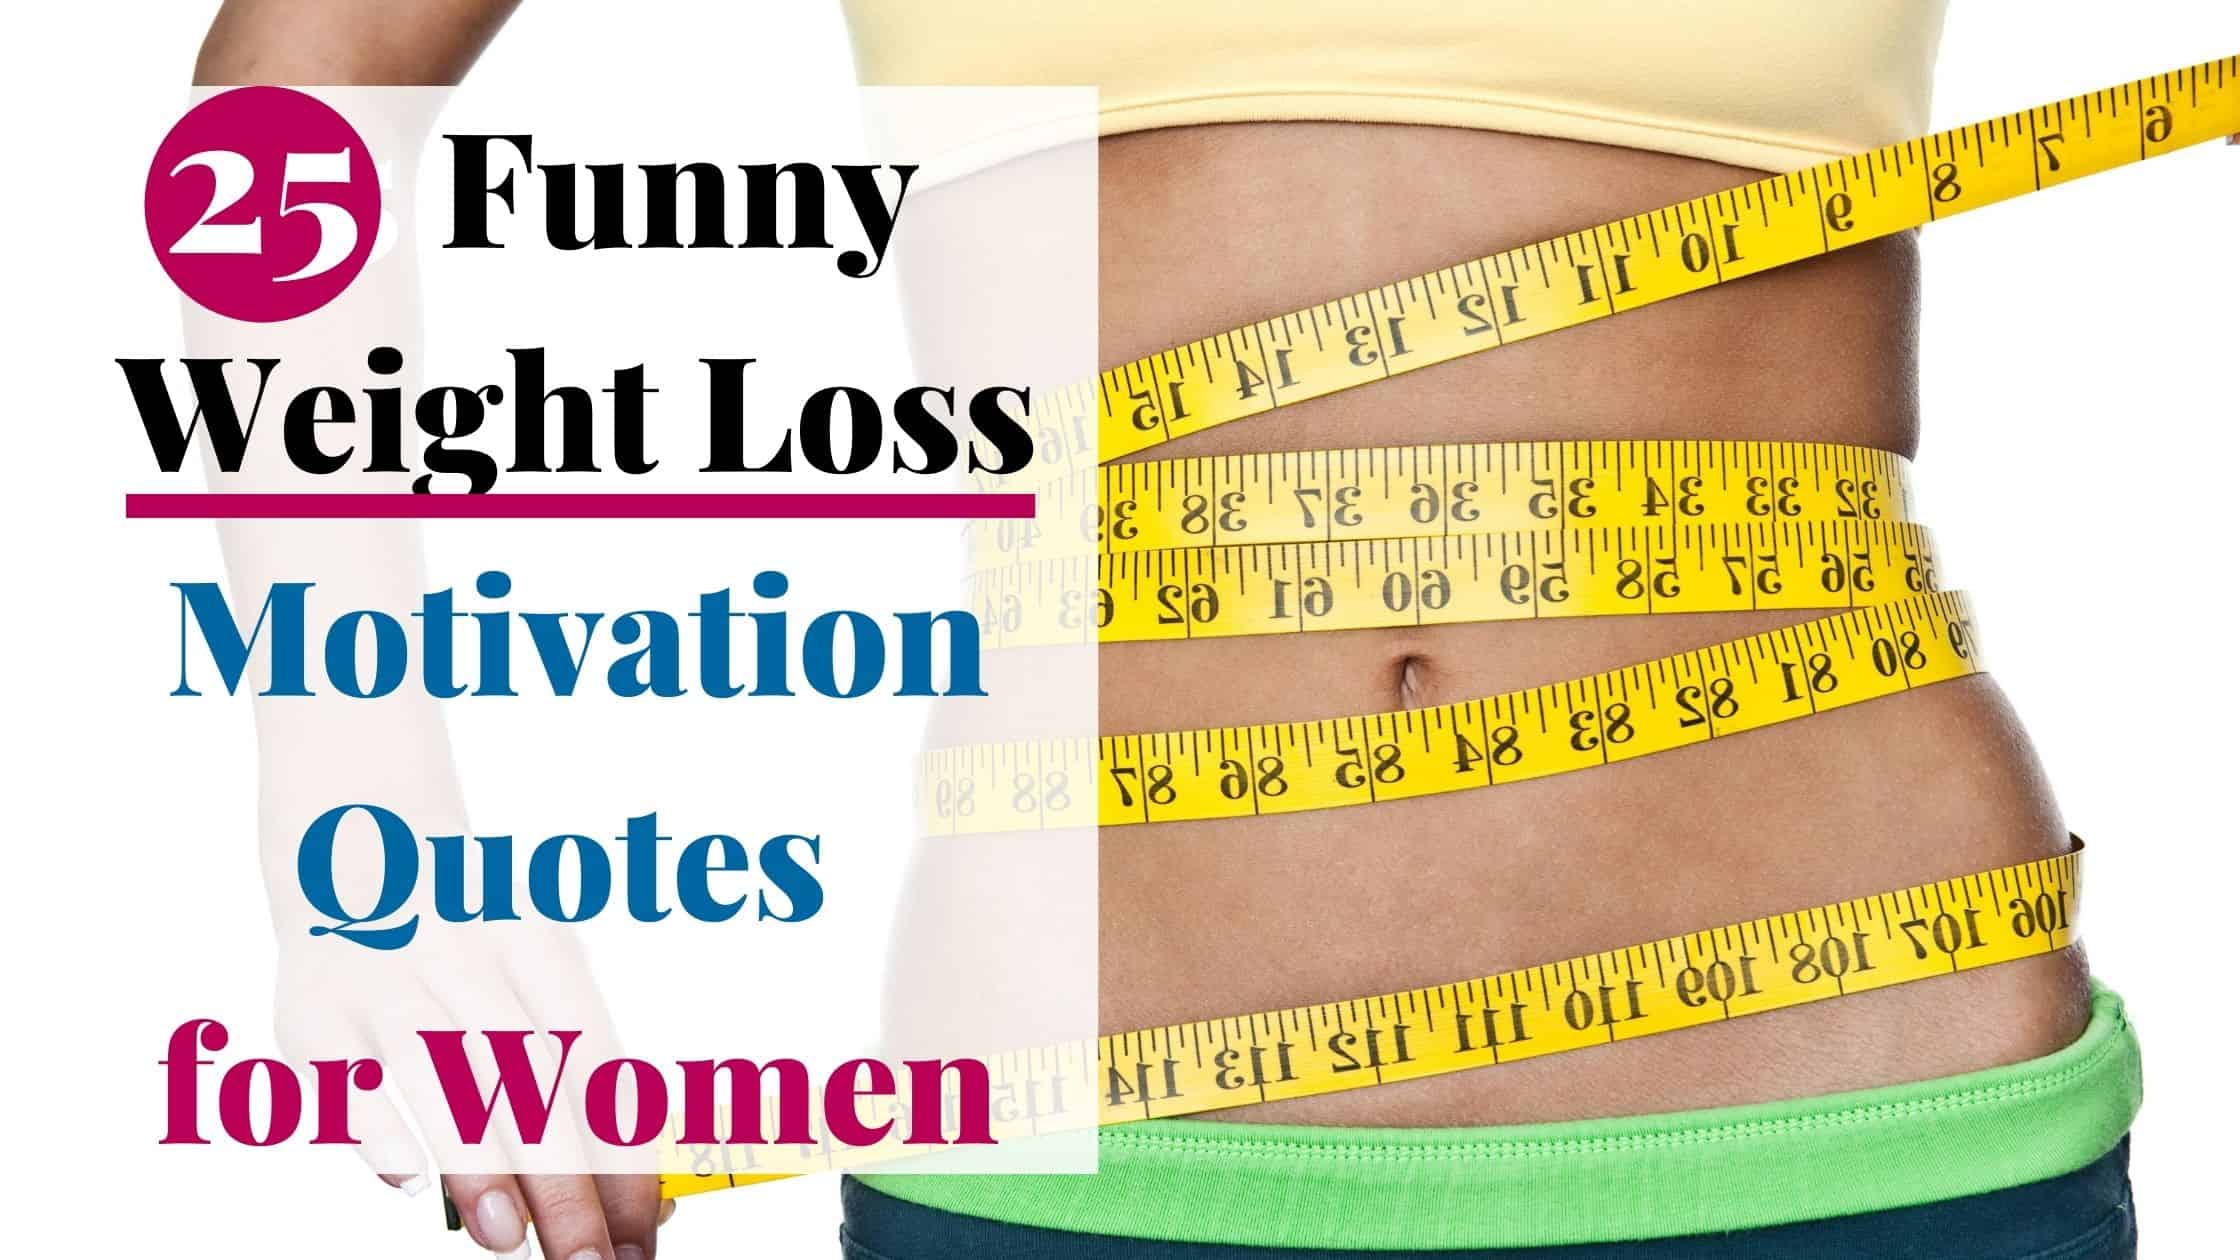 25 Funny Weight Loss Motivation Quotes for Women